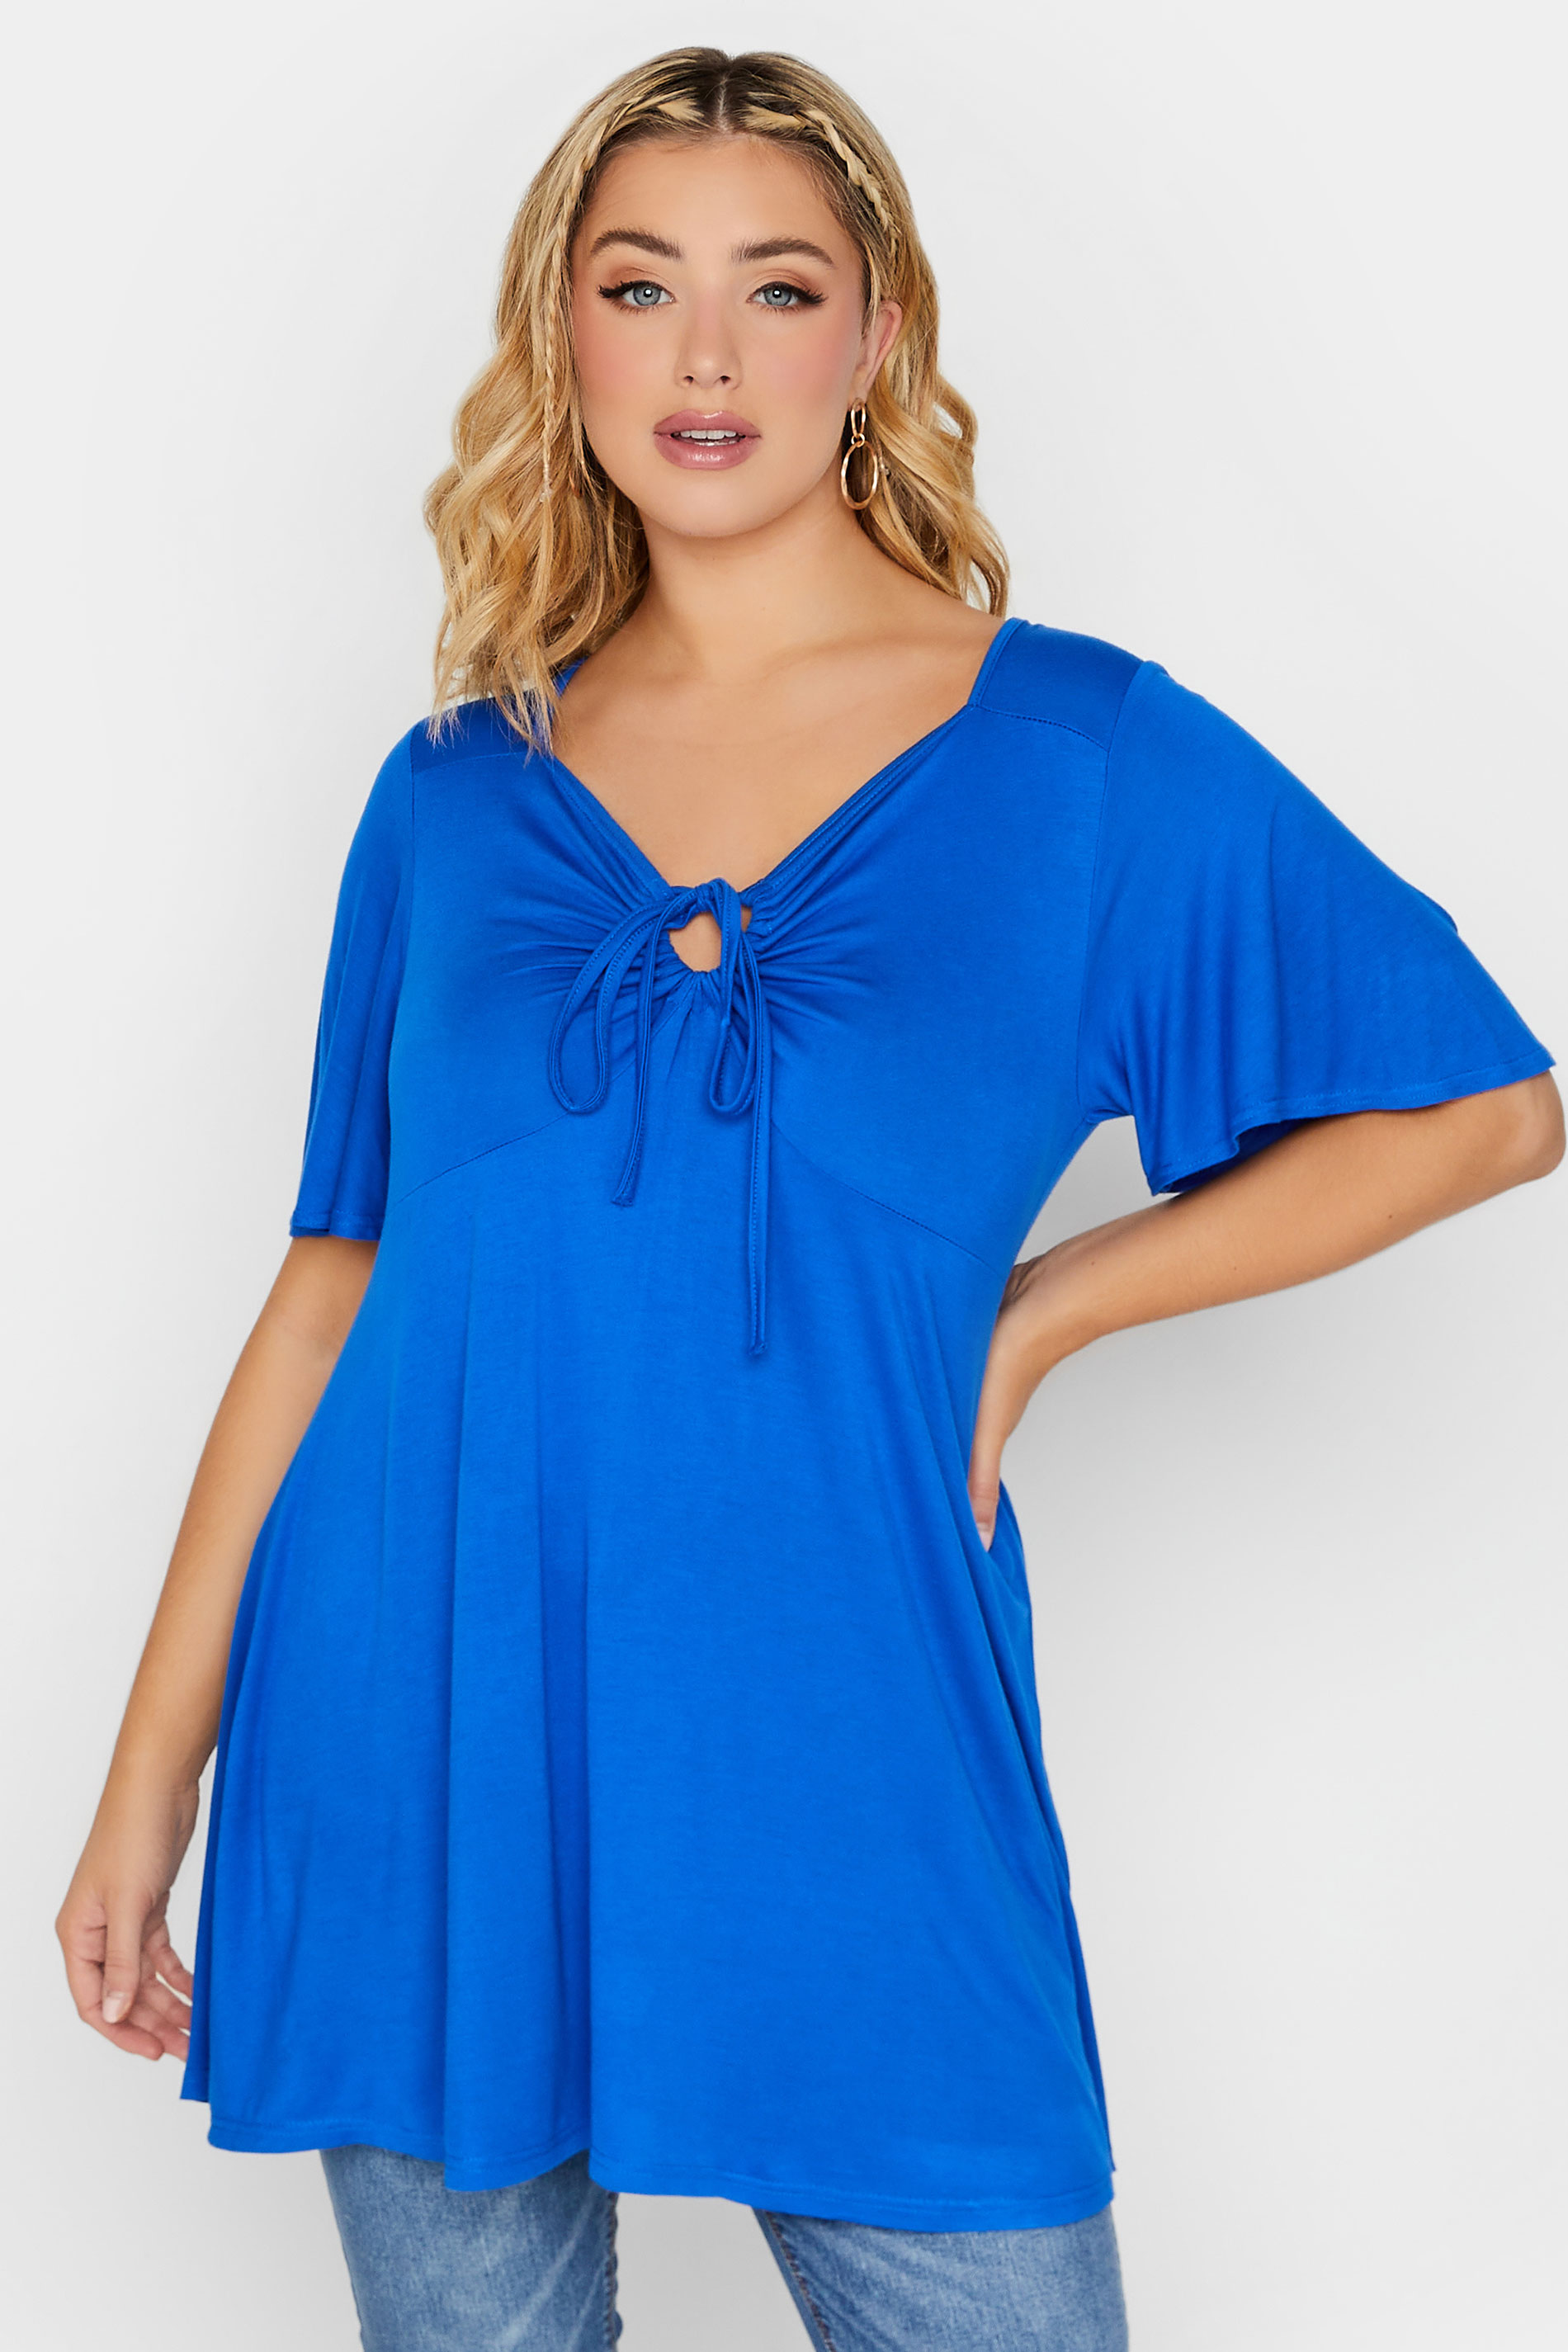 LIMITED COLLECTION Curve Plus Size Cobalt Blue Tie Neck Top | Yours Clothing  1